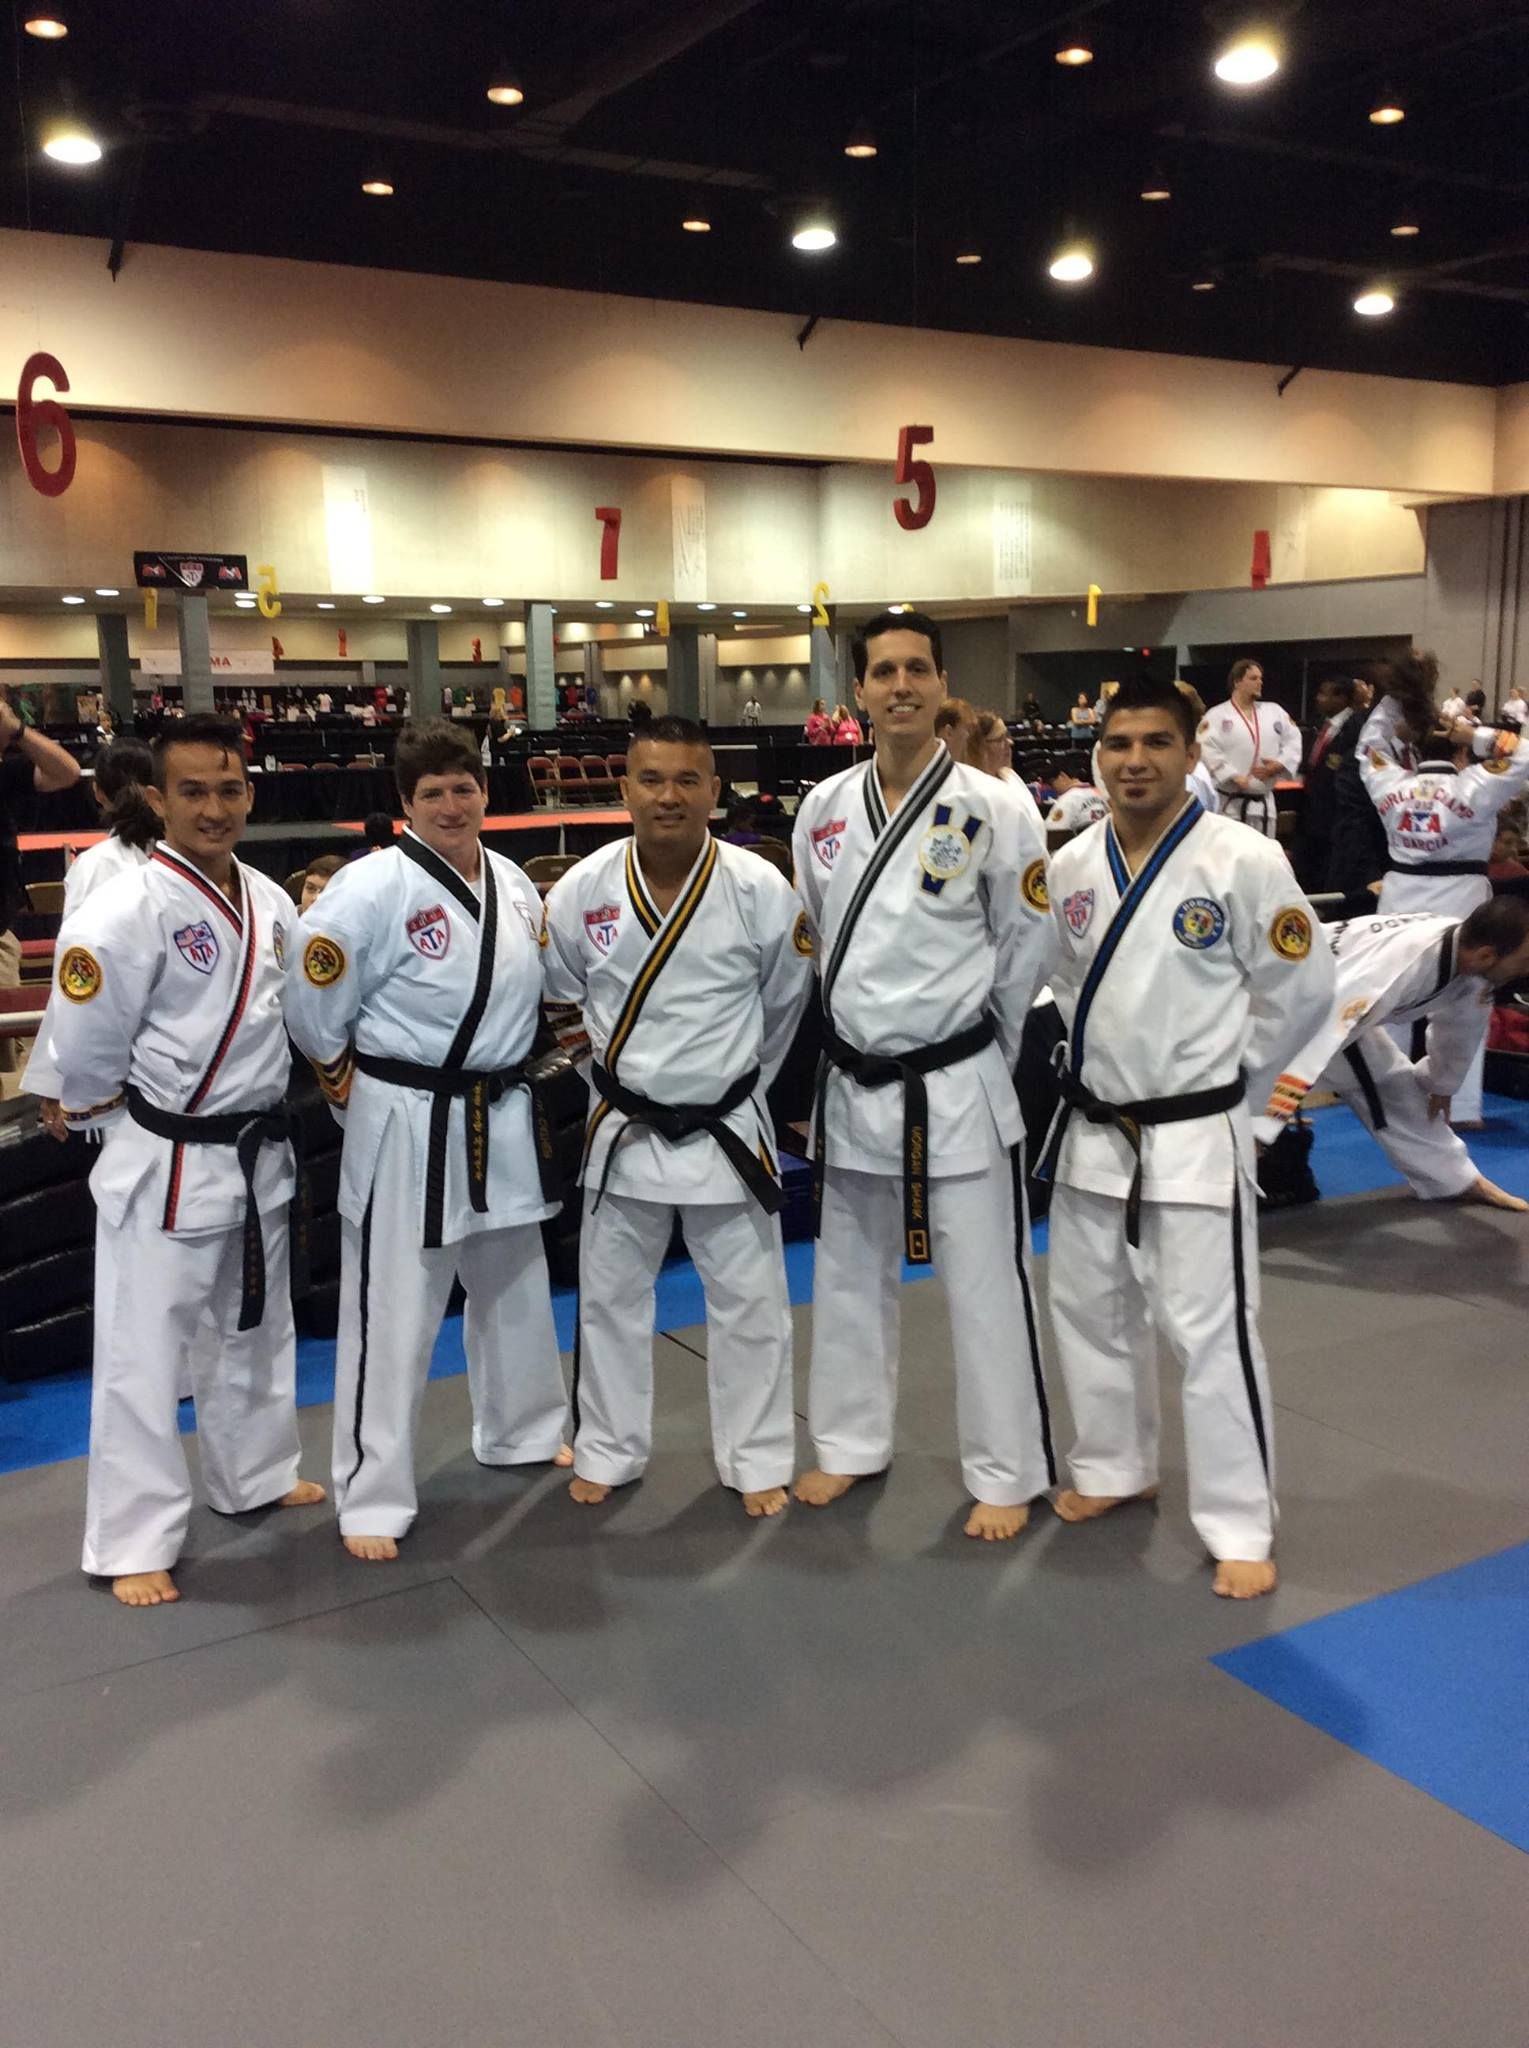 A group of men in karate uniforms pose for a picture